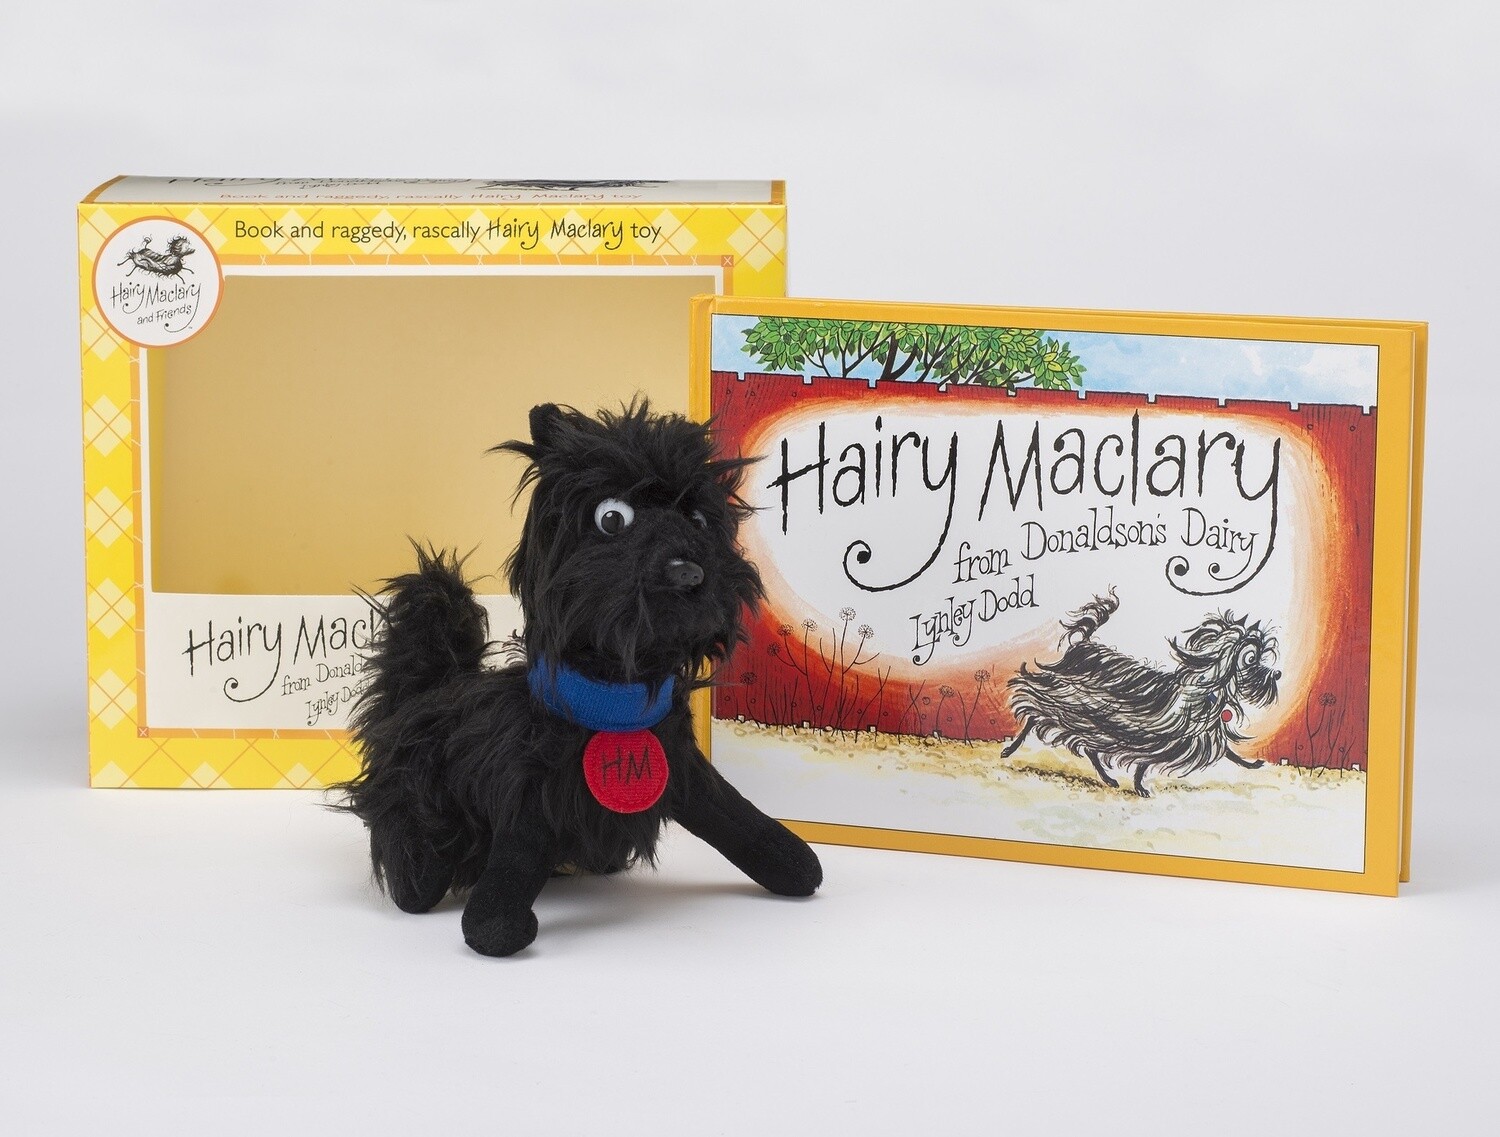 Hairy Maclary Book and Toy Set by Lynley Dodd